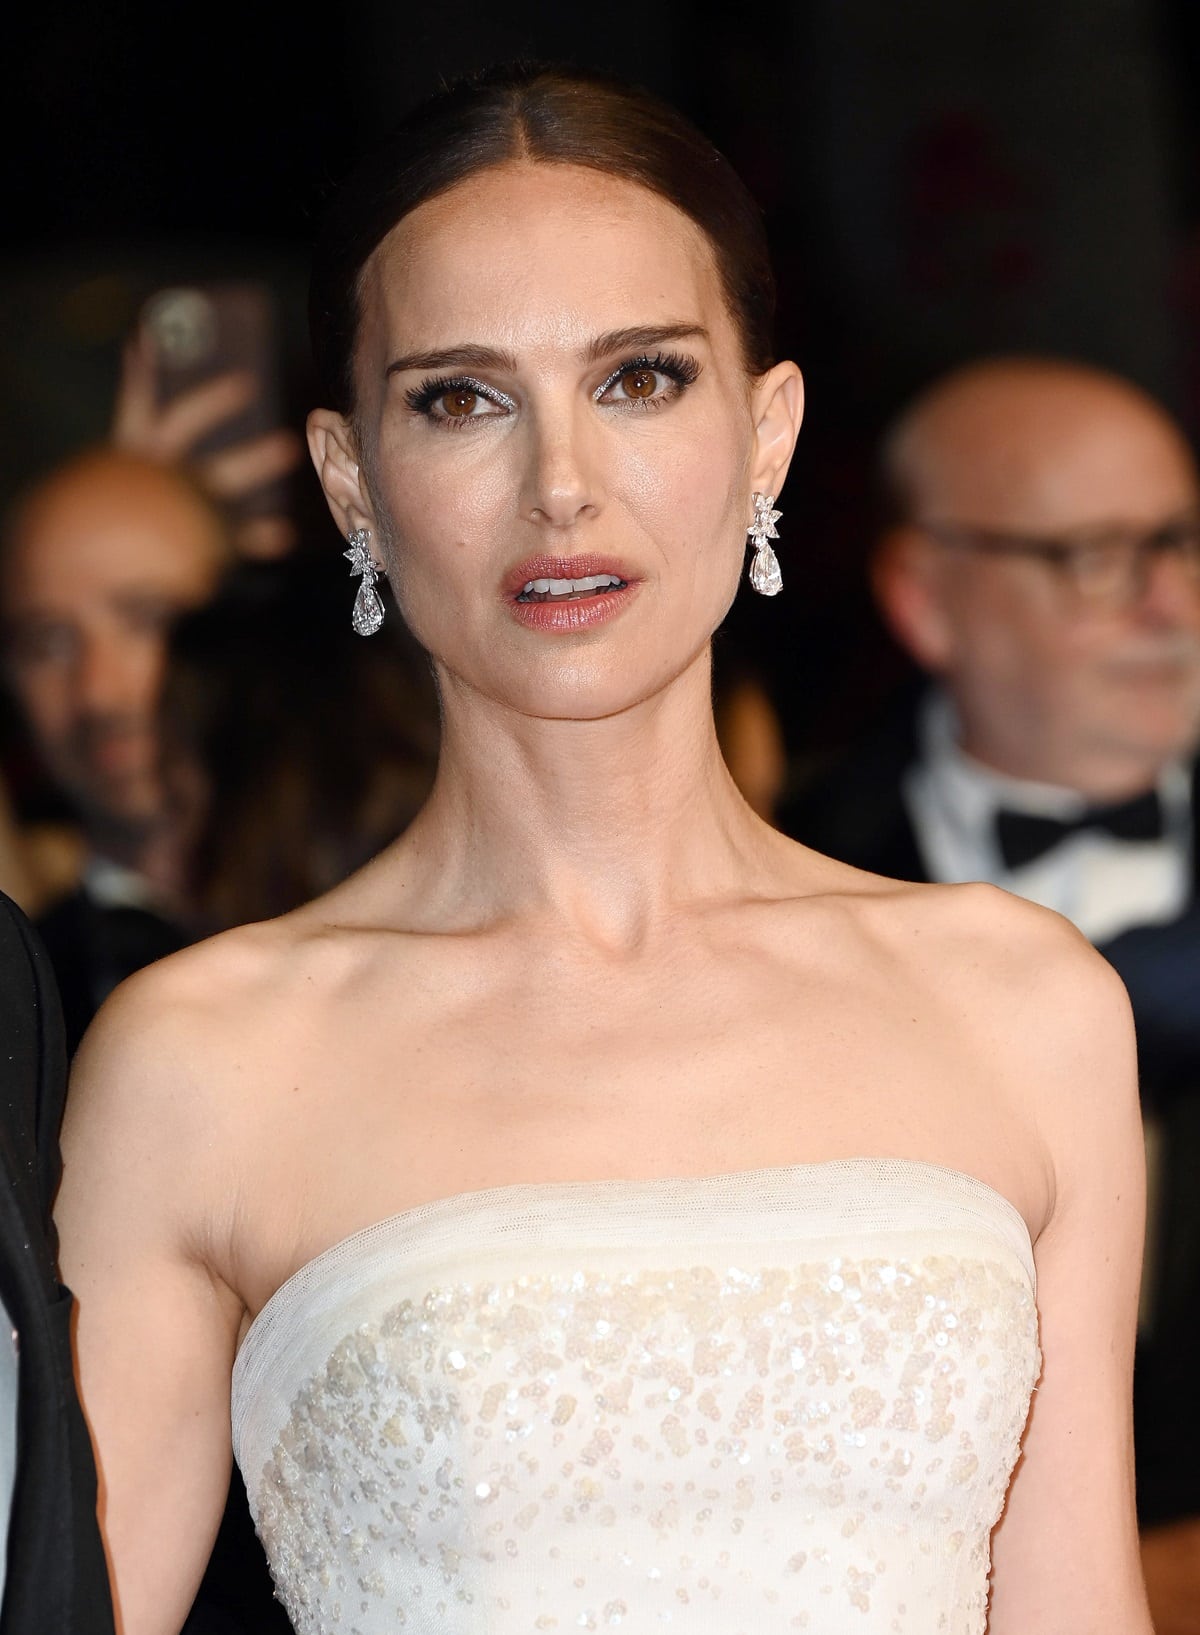 Natalie Portman effortlessly exuded elegance, earning accolades from fashion experts who hailed her dress as one of the highlights of the prestigious French festival